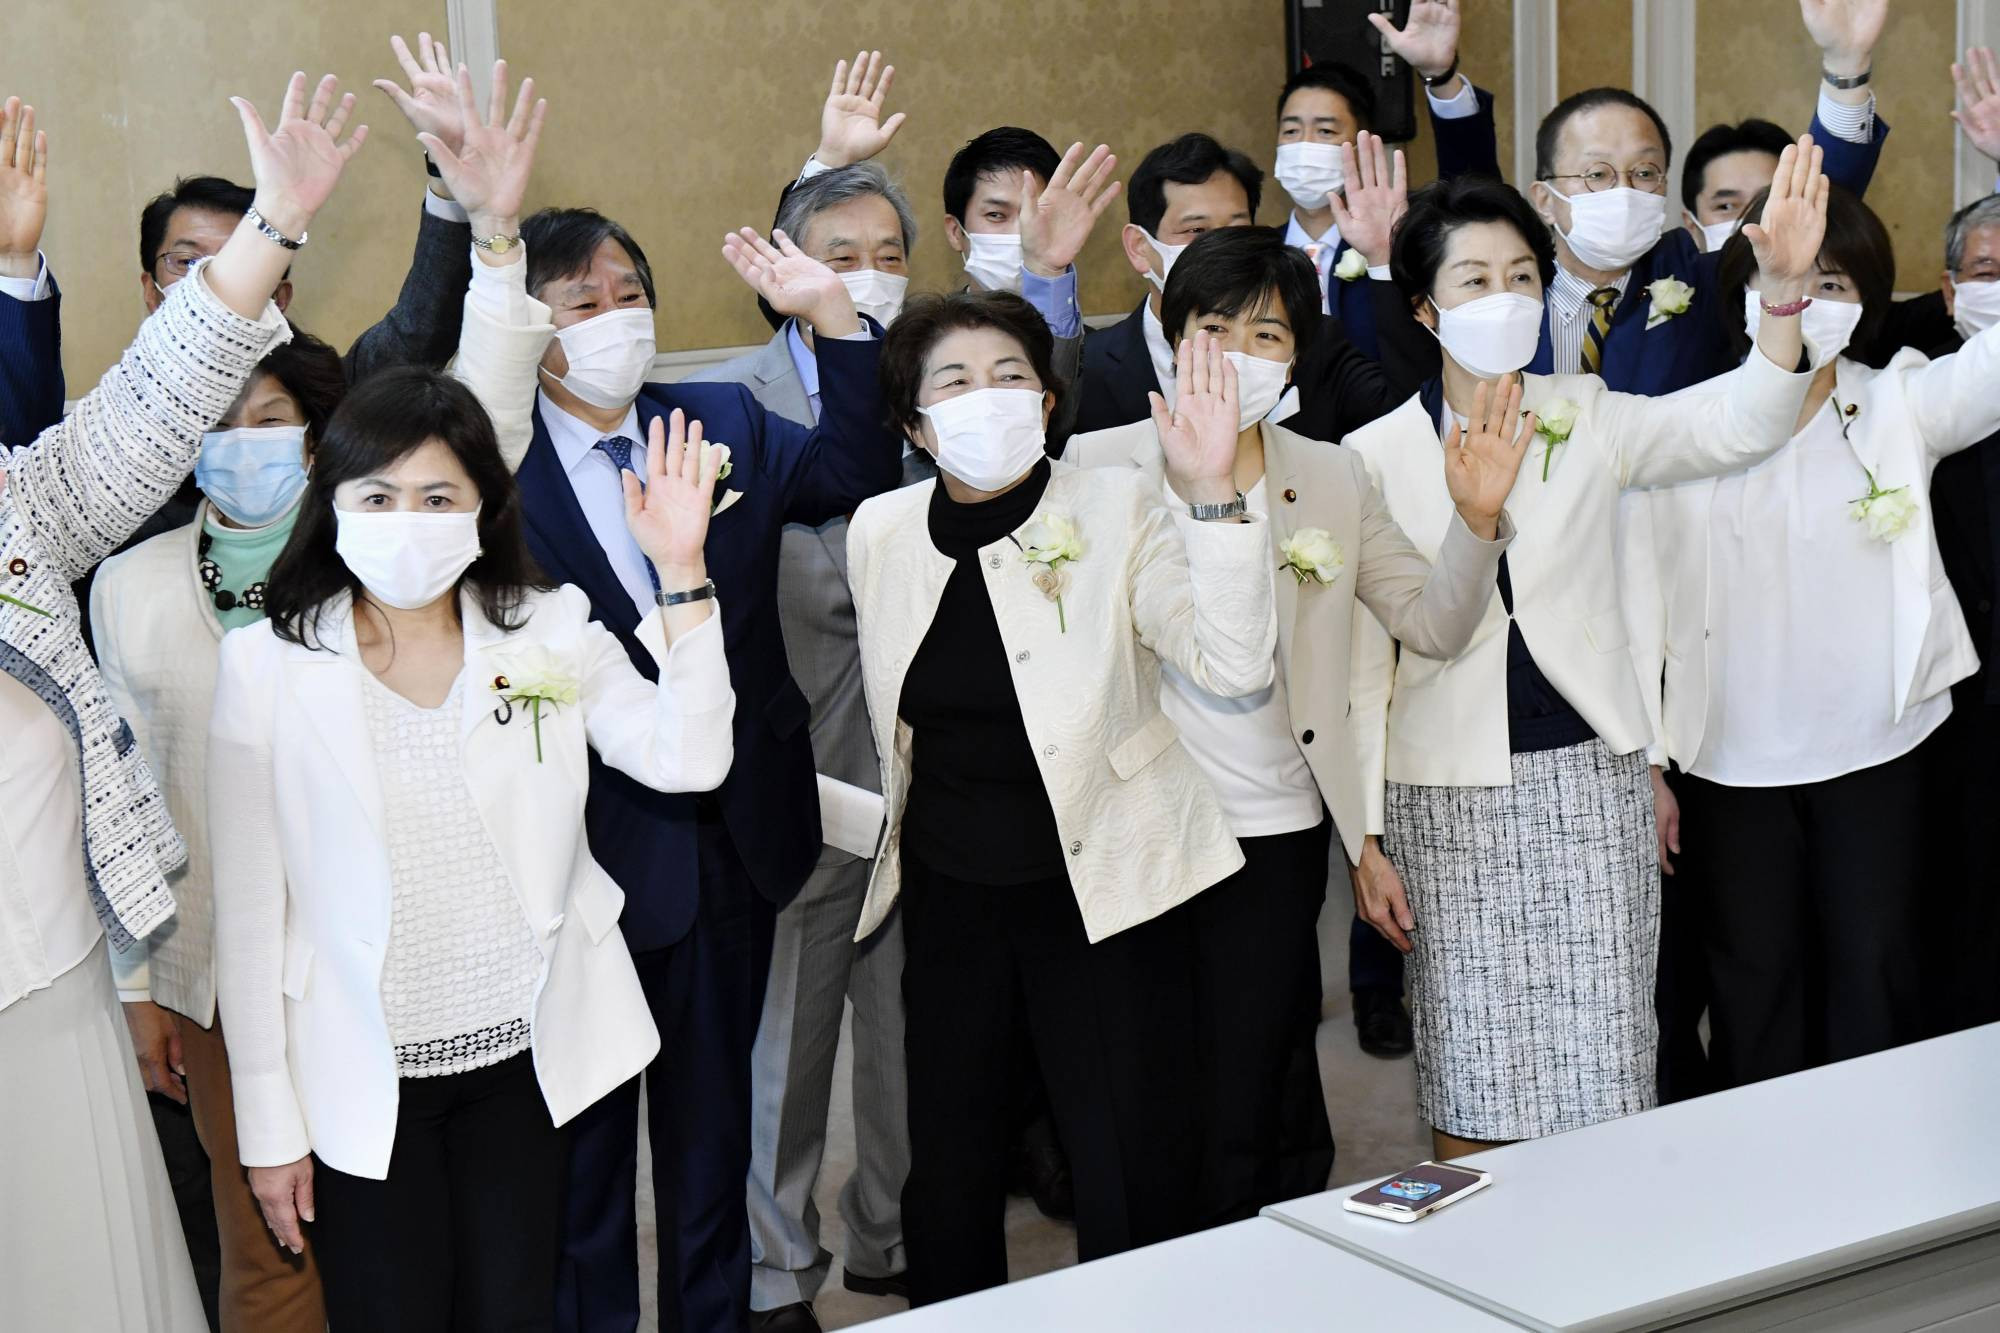 Japanese politicians wear white in protest of comments made by Tokyo 2020 President as sponsors join criticism